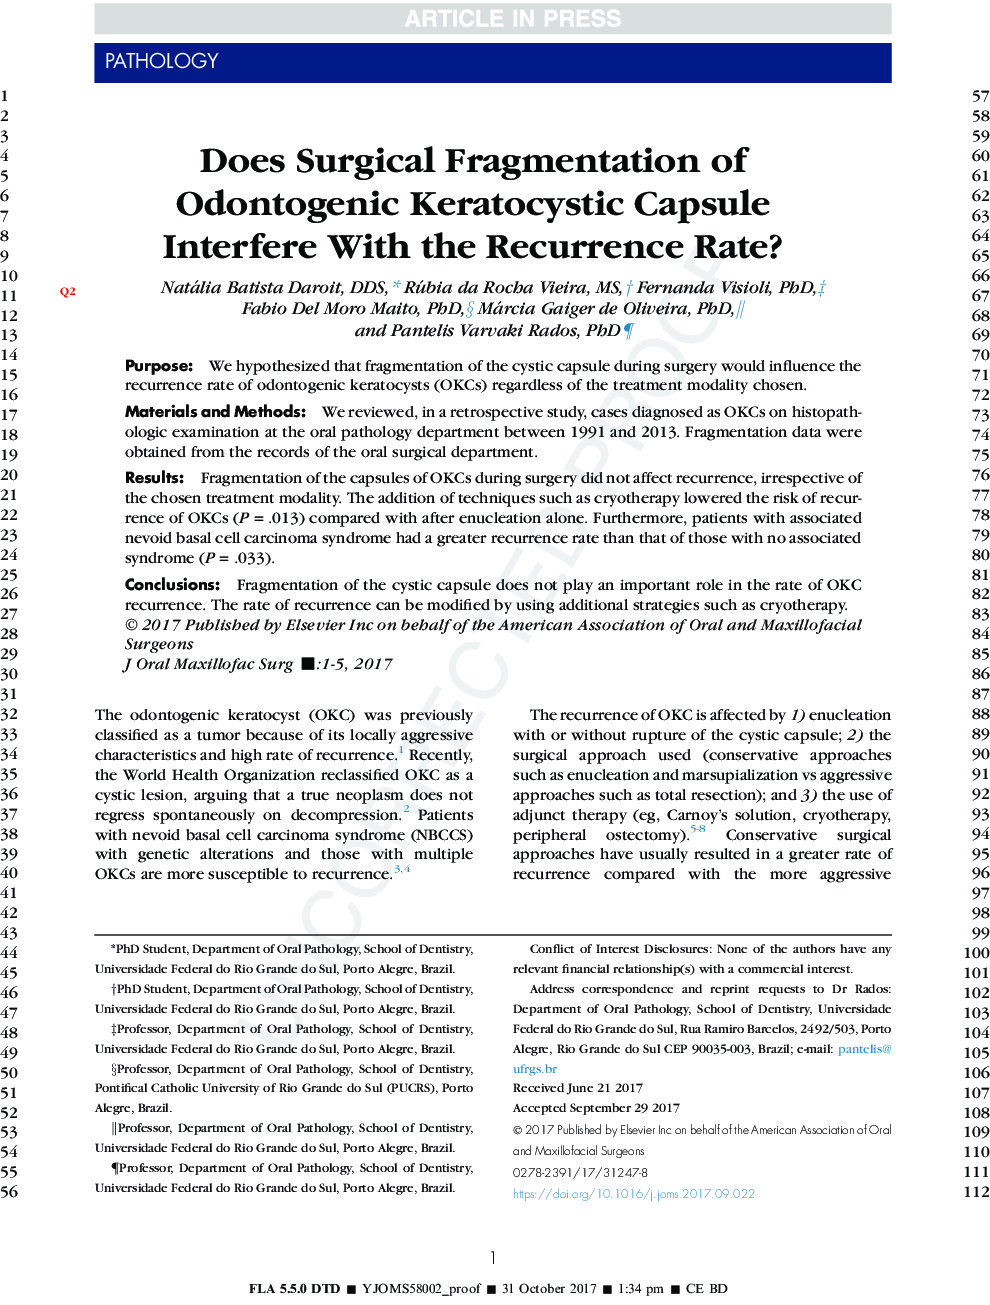 Does Surgical Fragmentation of Odontogenic Keratocystic Capsule Interfere With the Recurrence Rate?